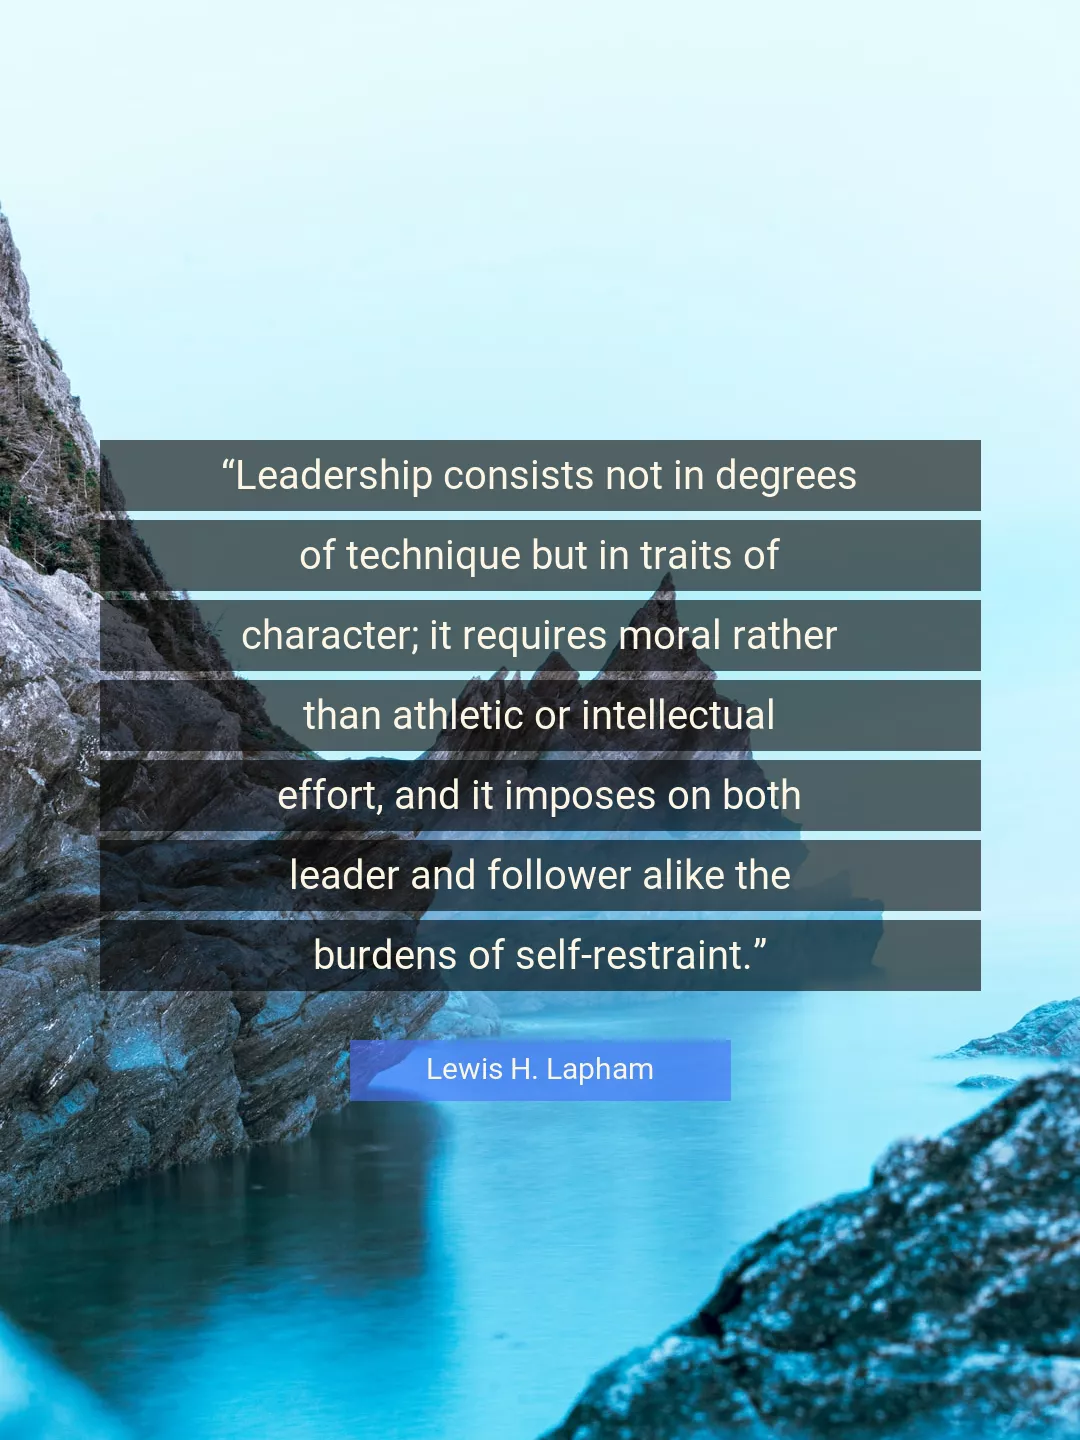 Quote About Leadership By Lewis H. Lapham